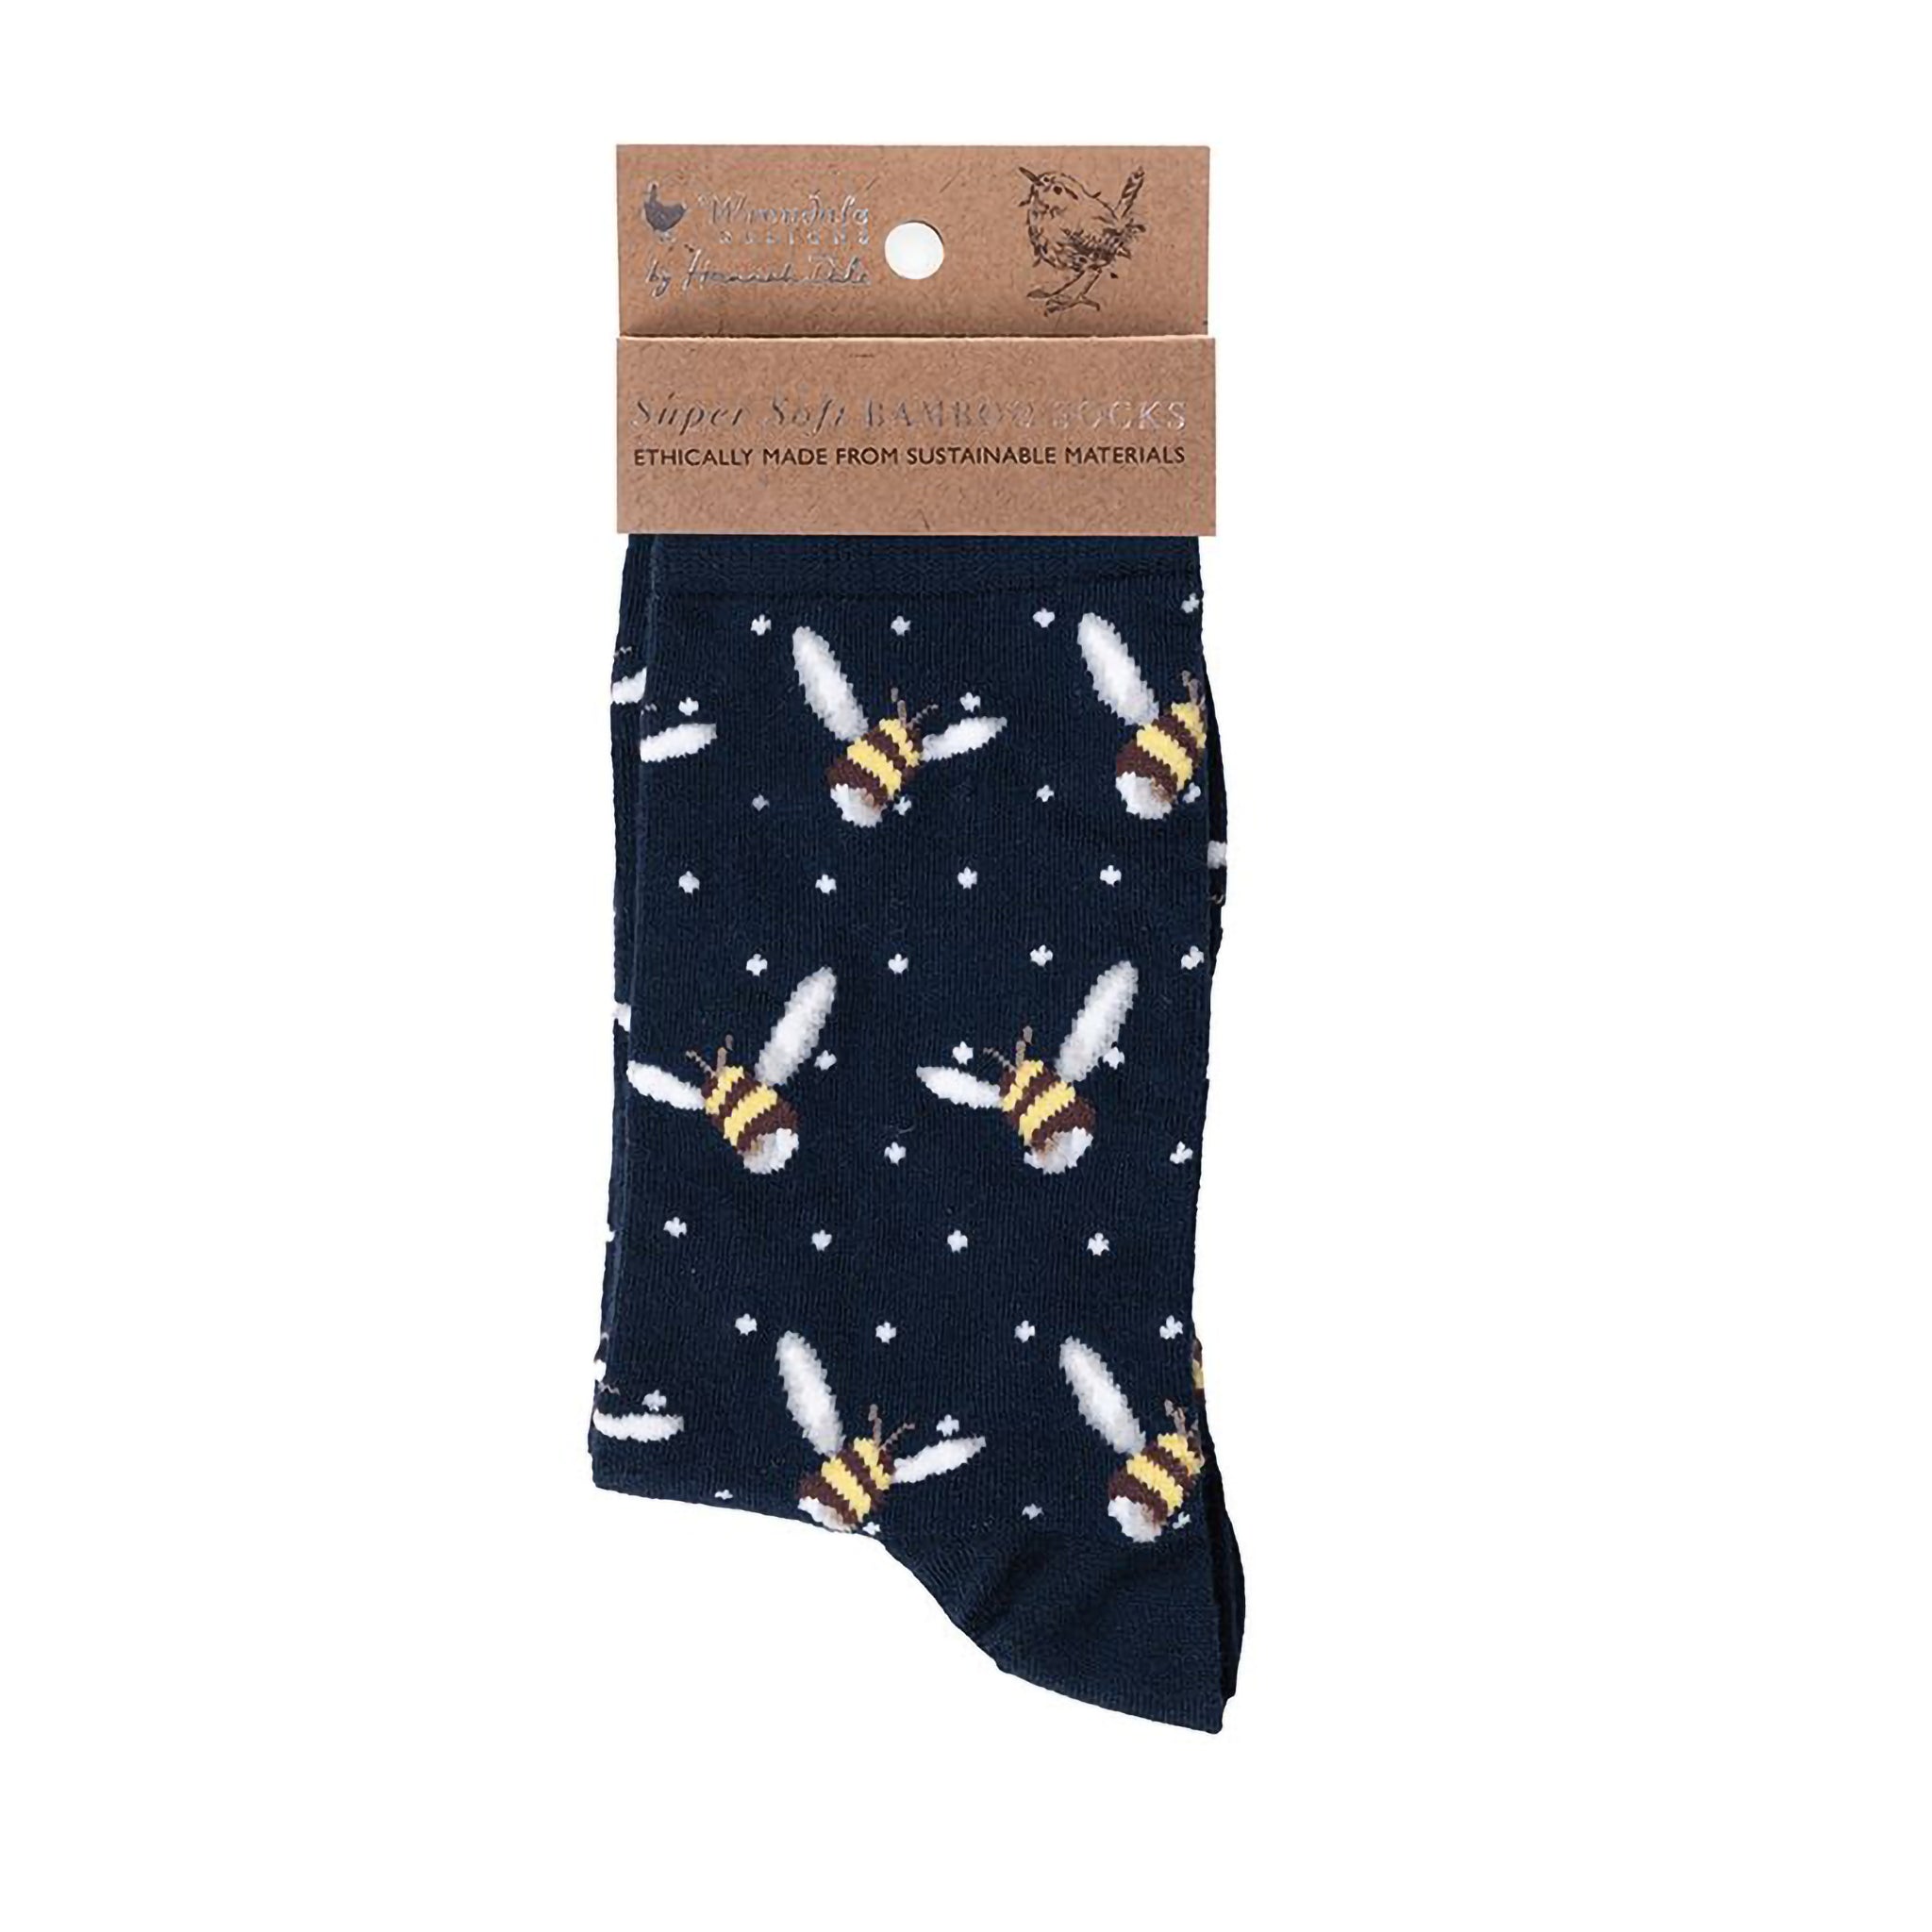 Folded pair of navy blue socks with a bumblebee picture and white polka dots